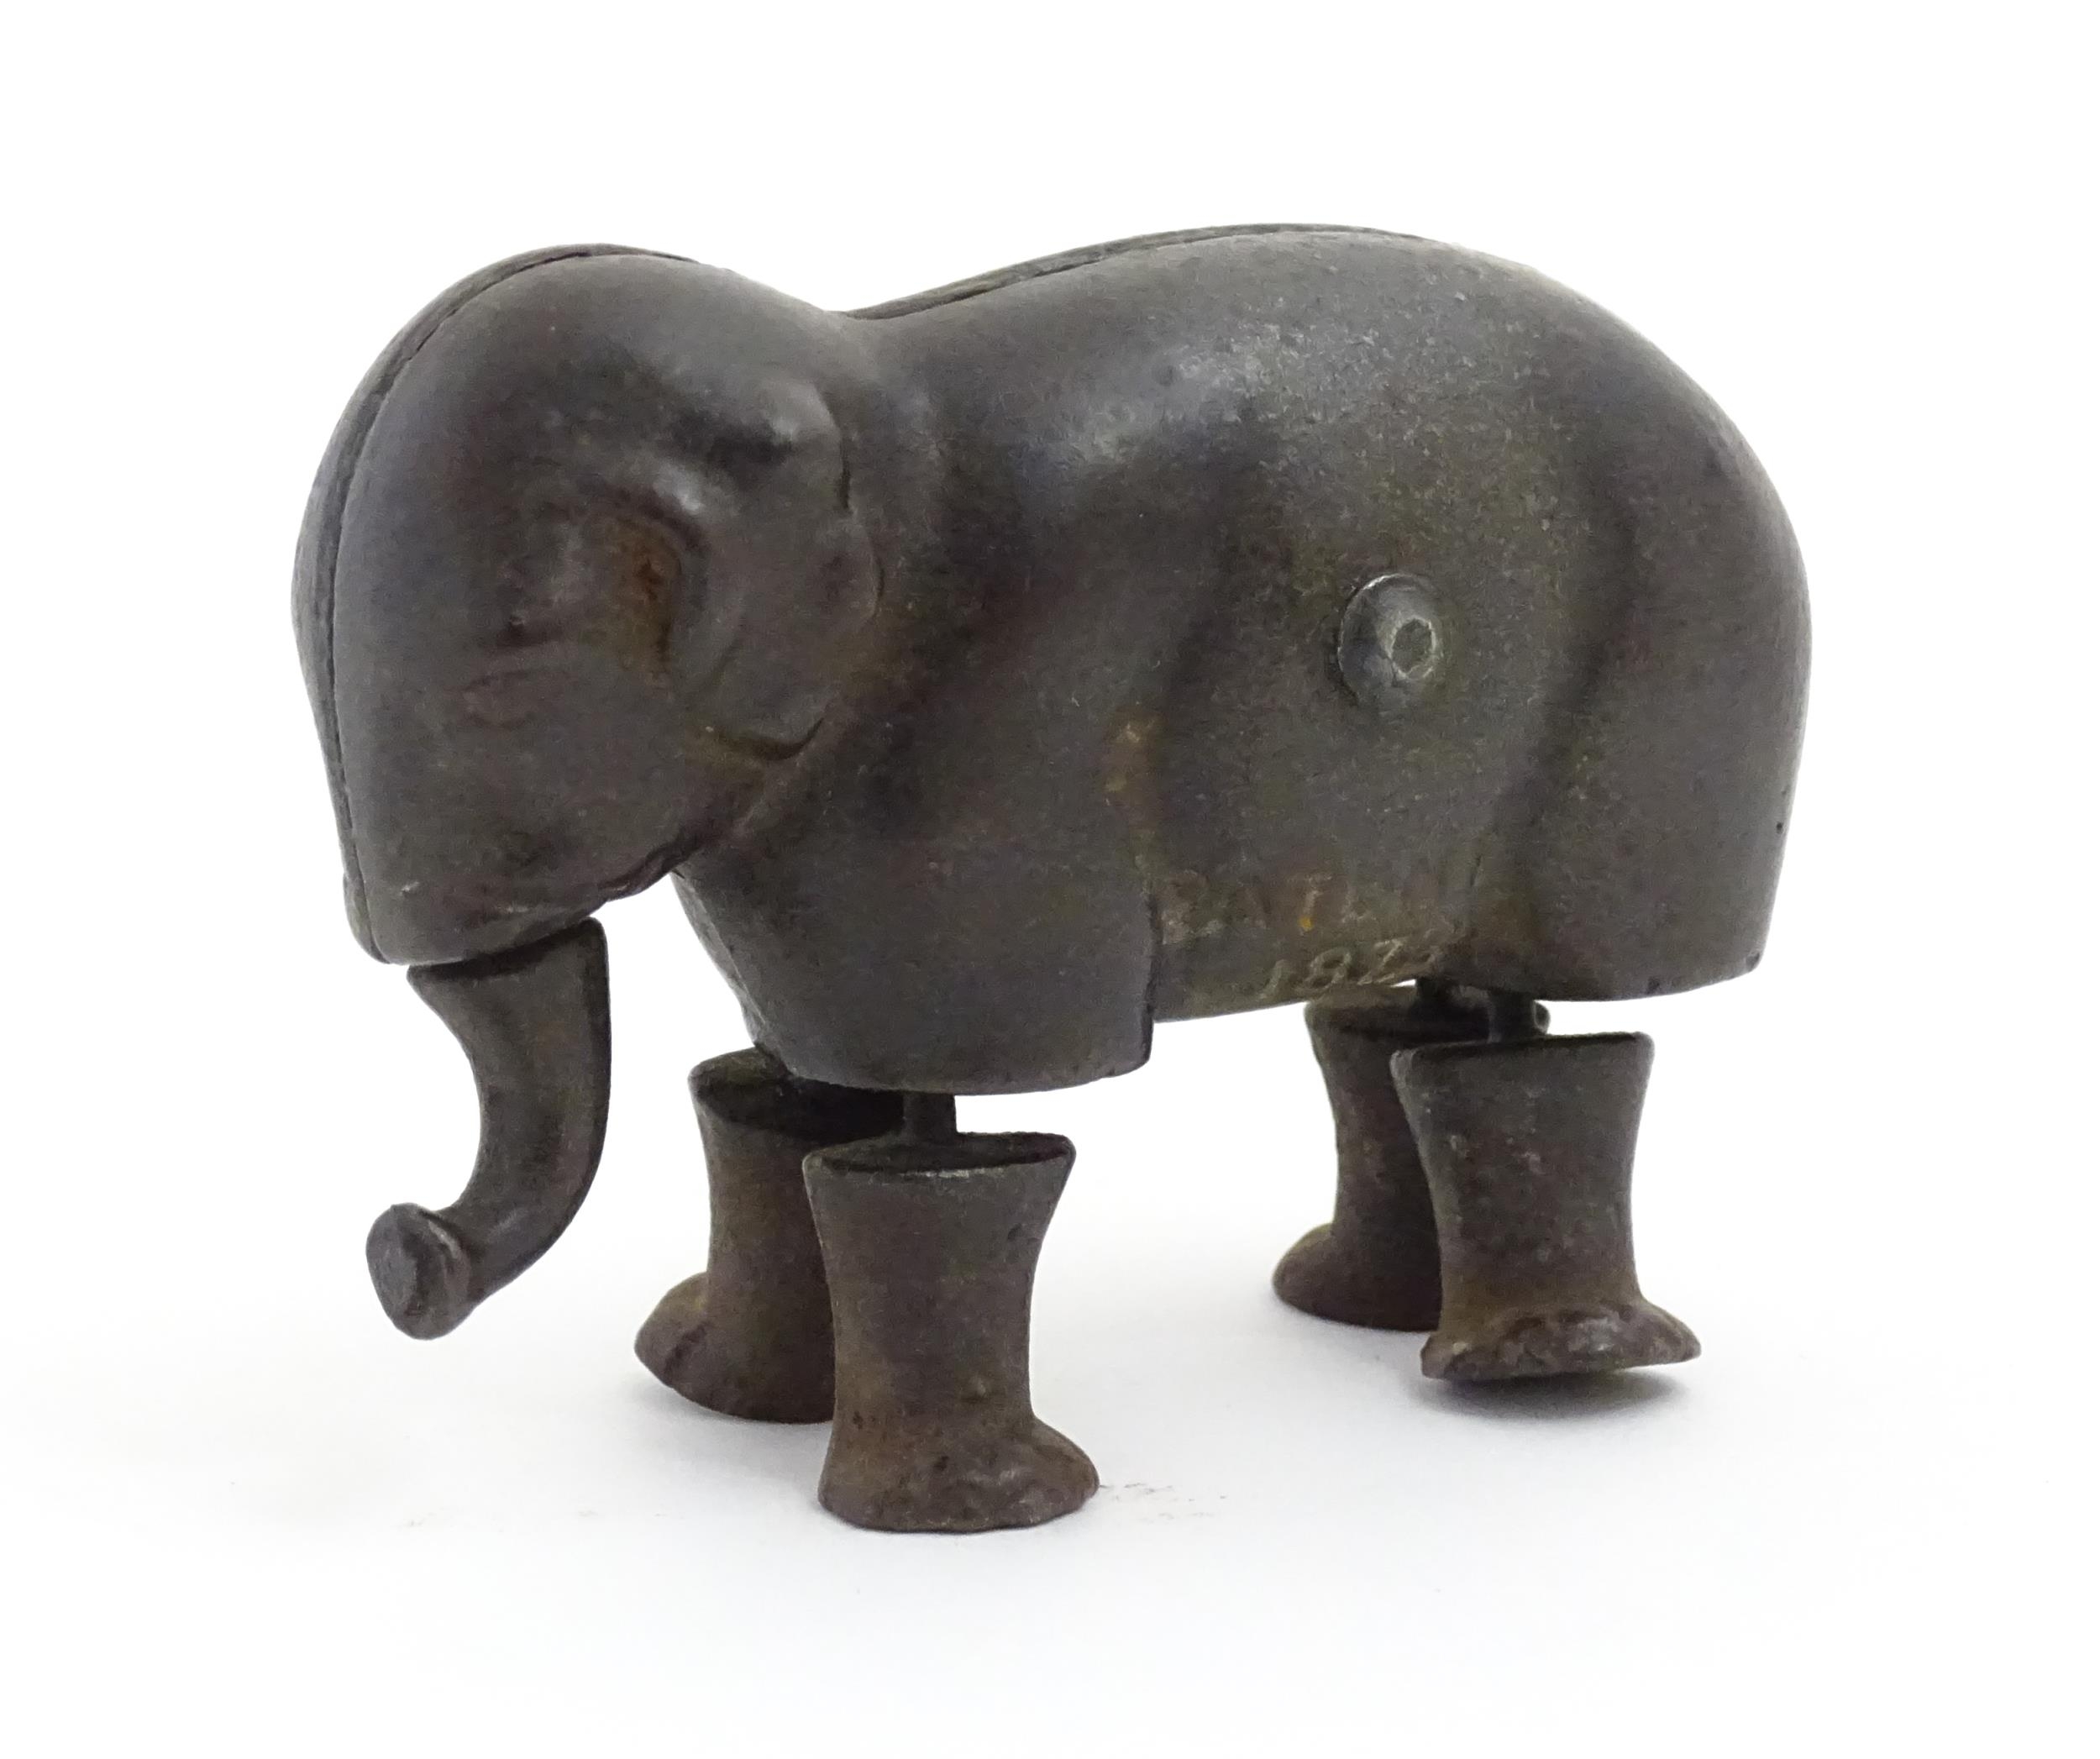 Toy: A late 19thC cast iron walking elephant toy with articulated legs and trunk, by the Ives Toy